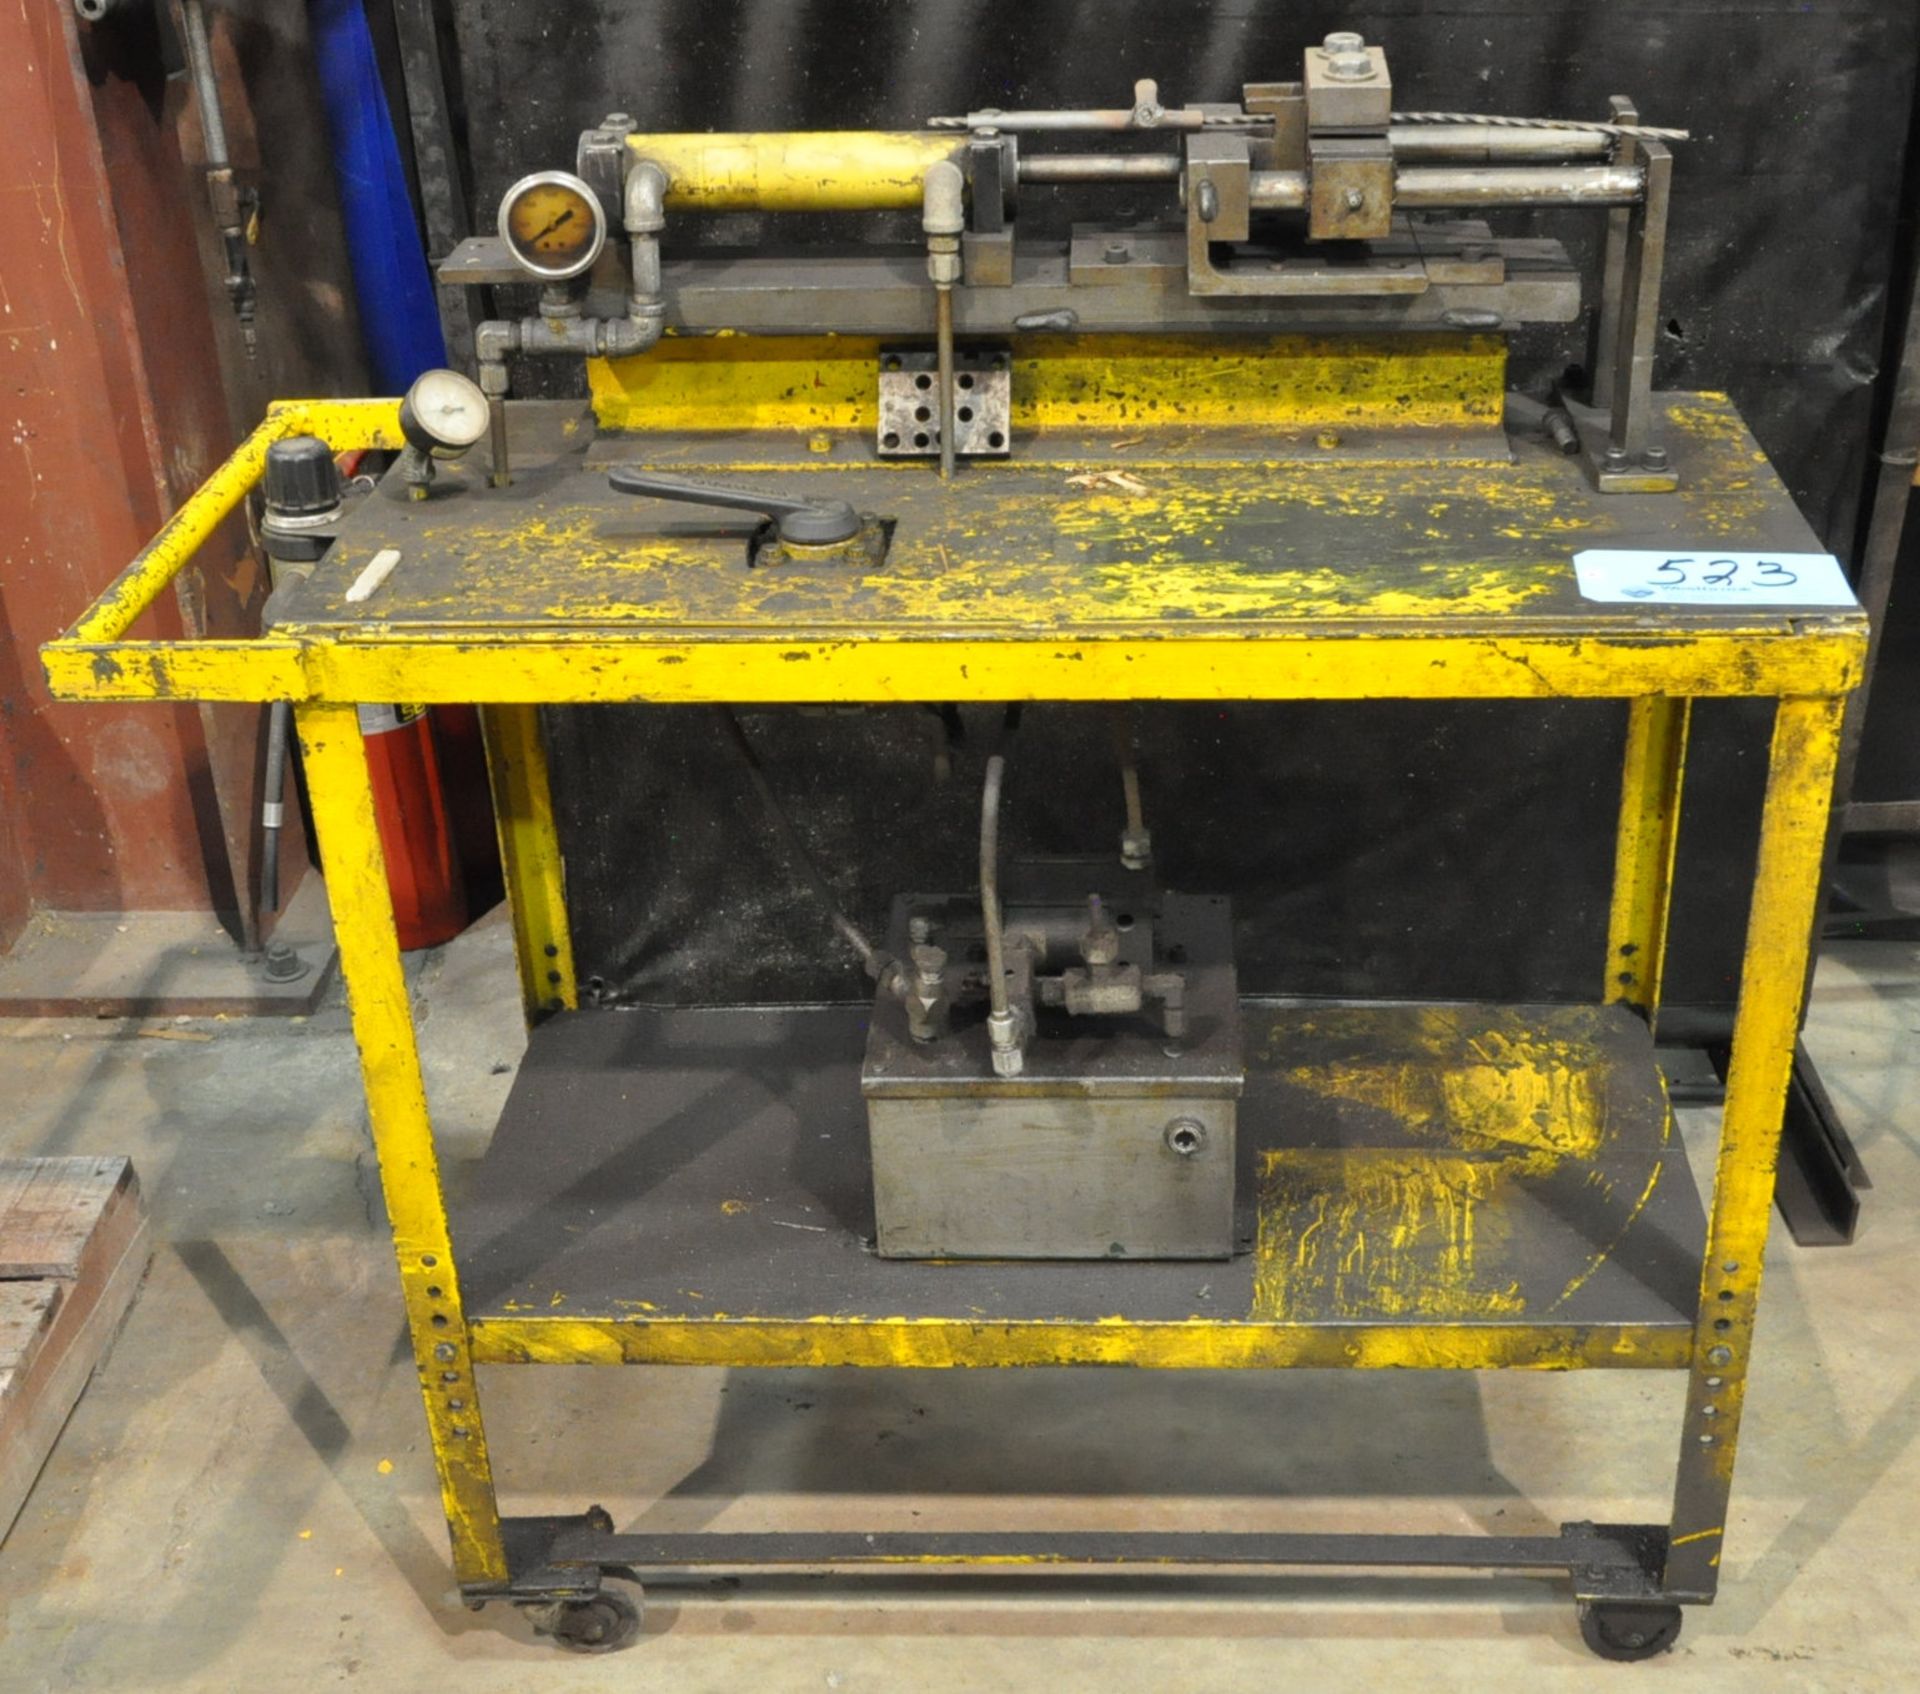 Enerpac Horizontal Hydraulic Clamping Fixture with Stand, Hydraulic Unit